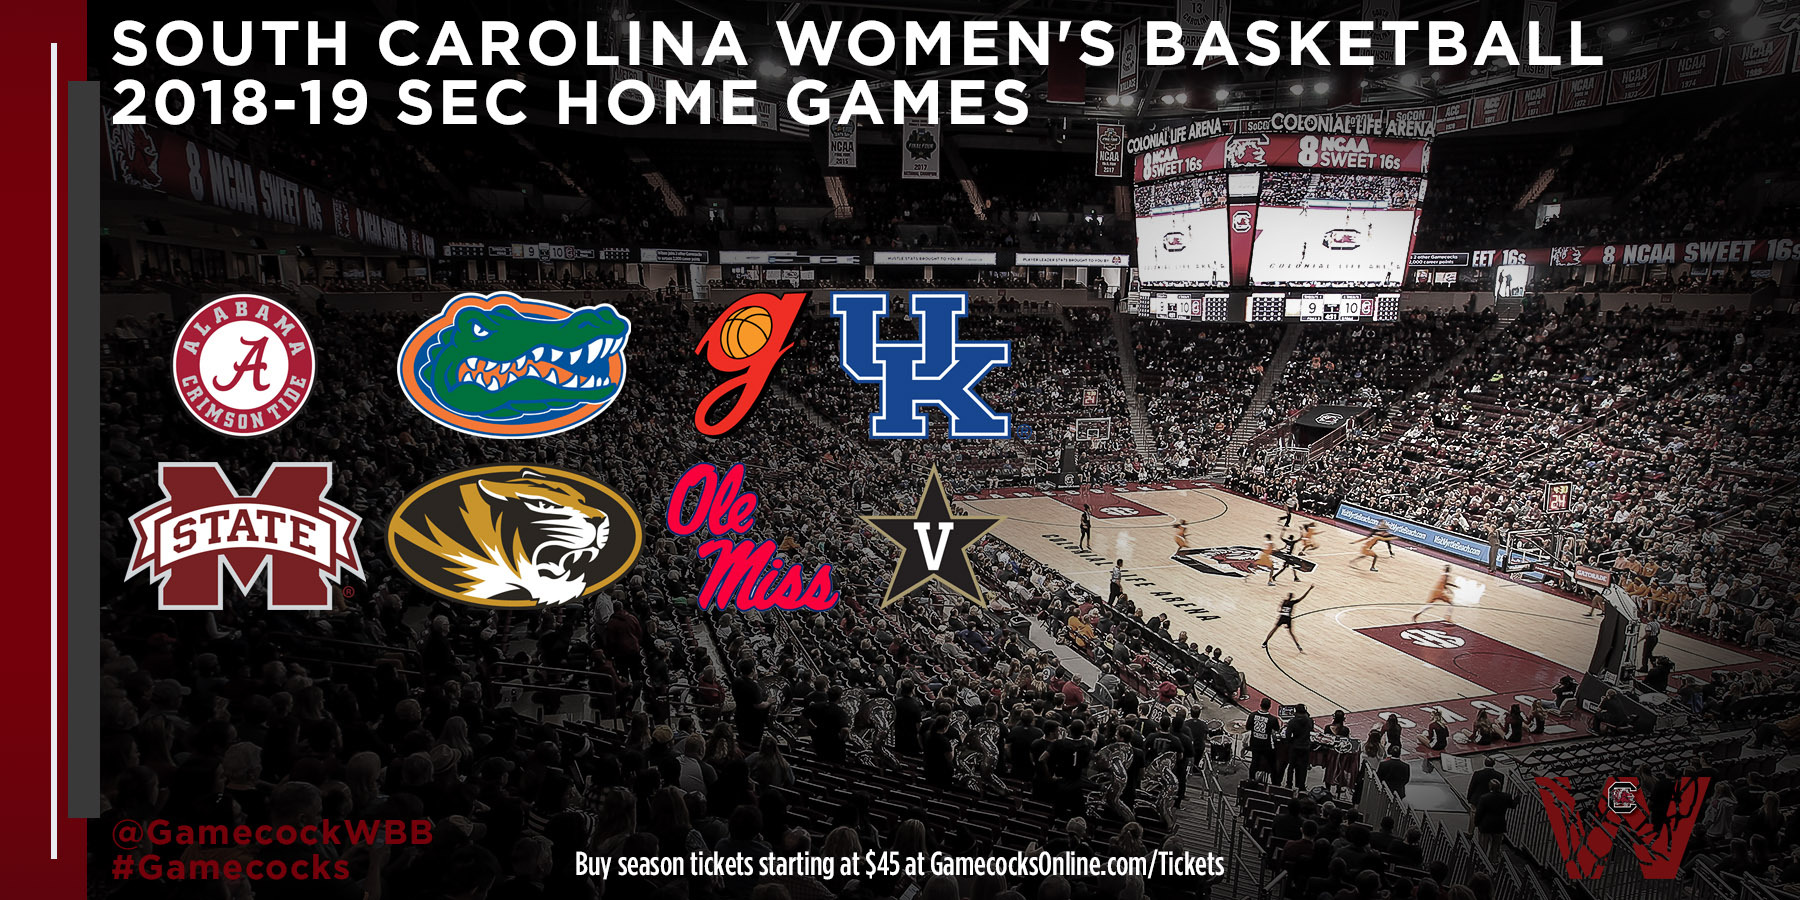 Gamecock Women's Basketball Tickets on Sale Now